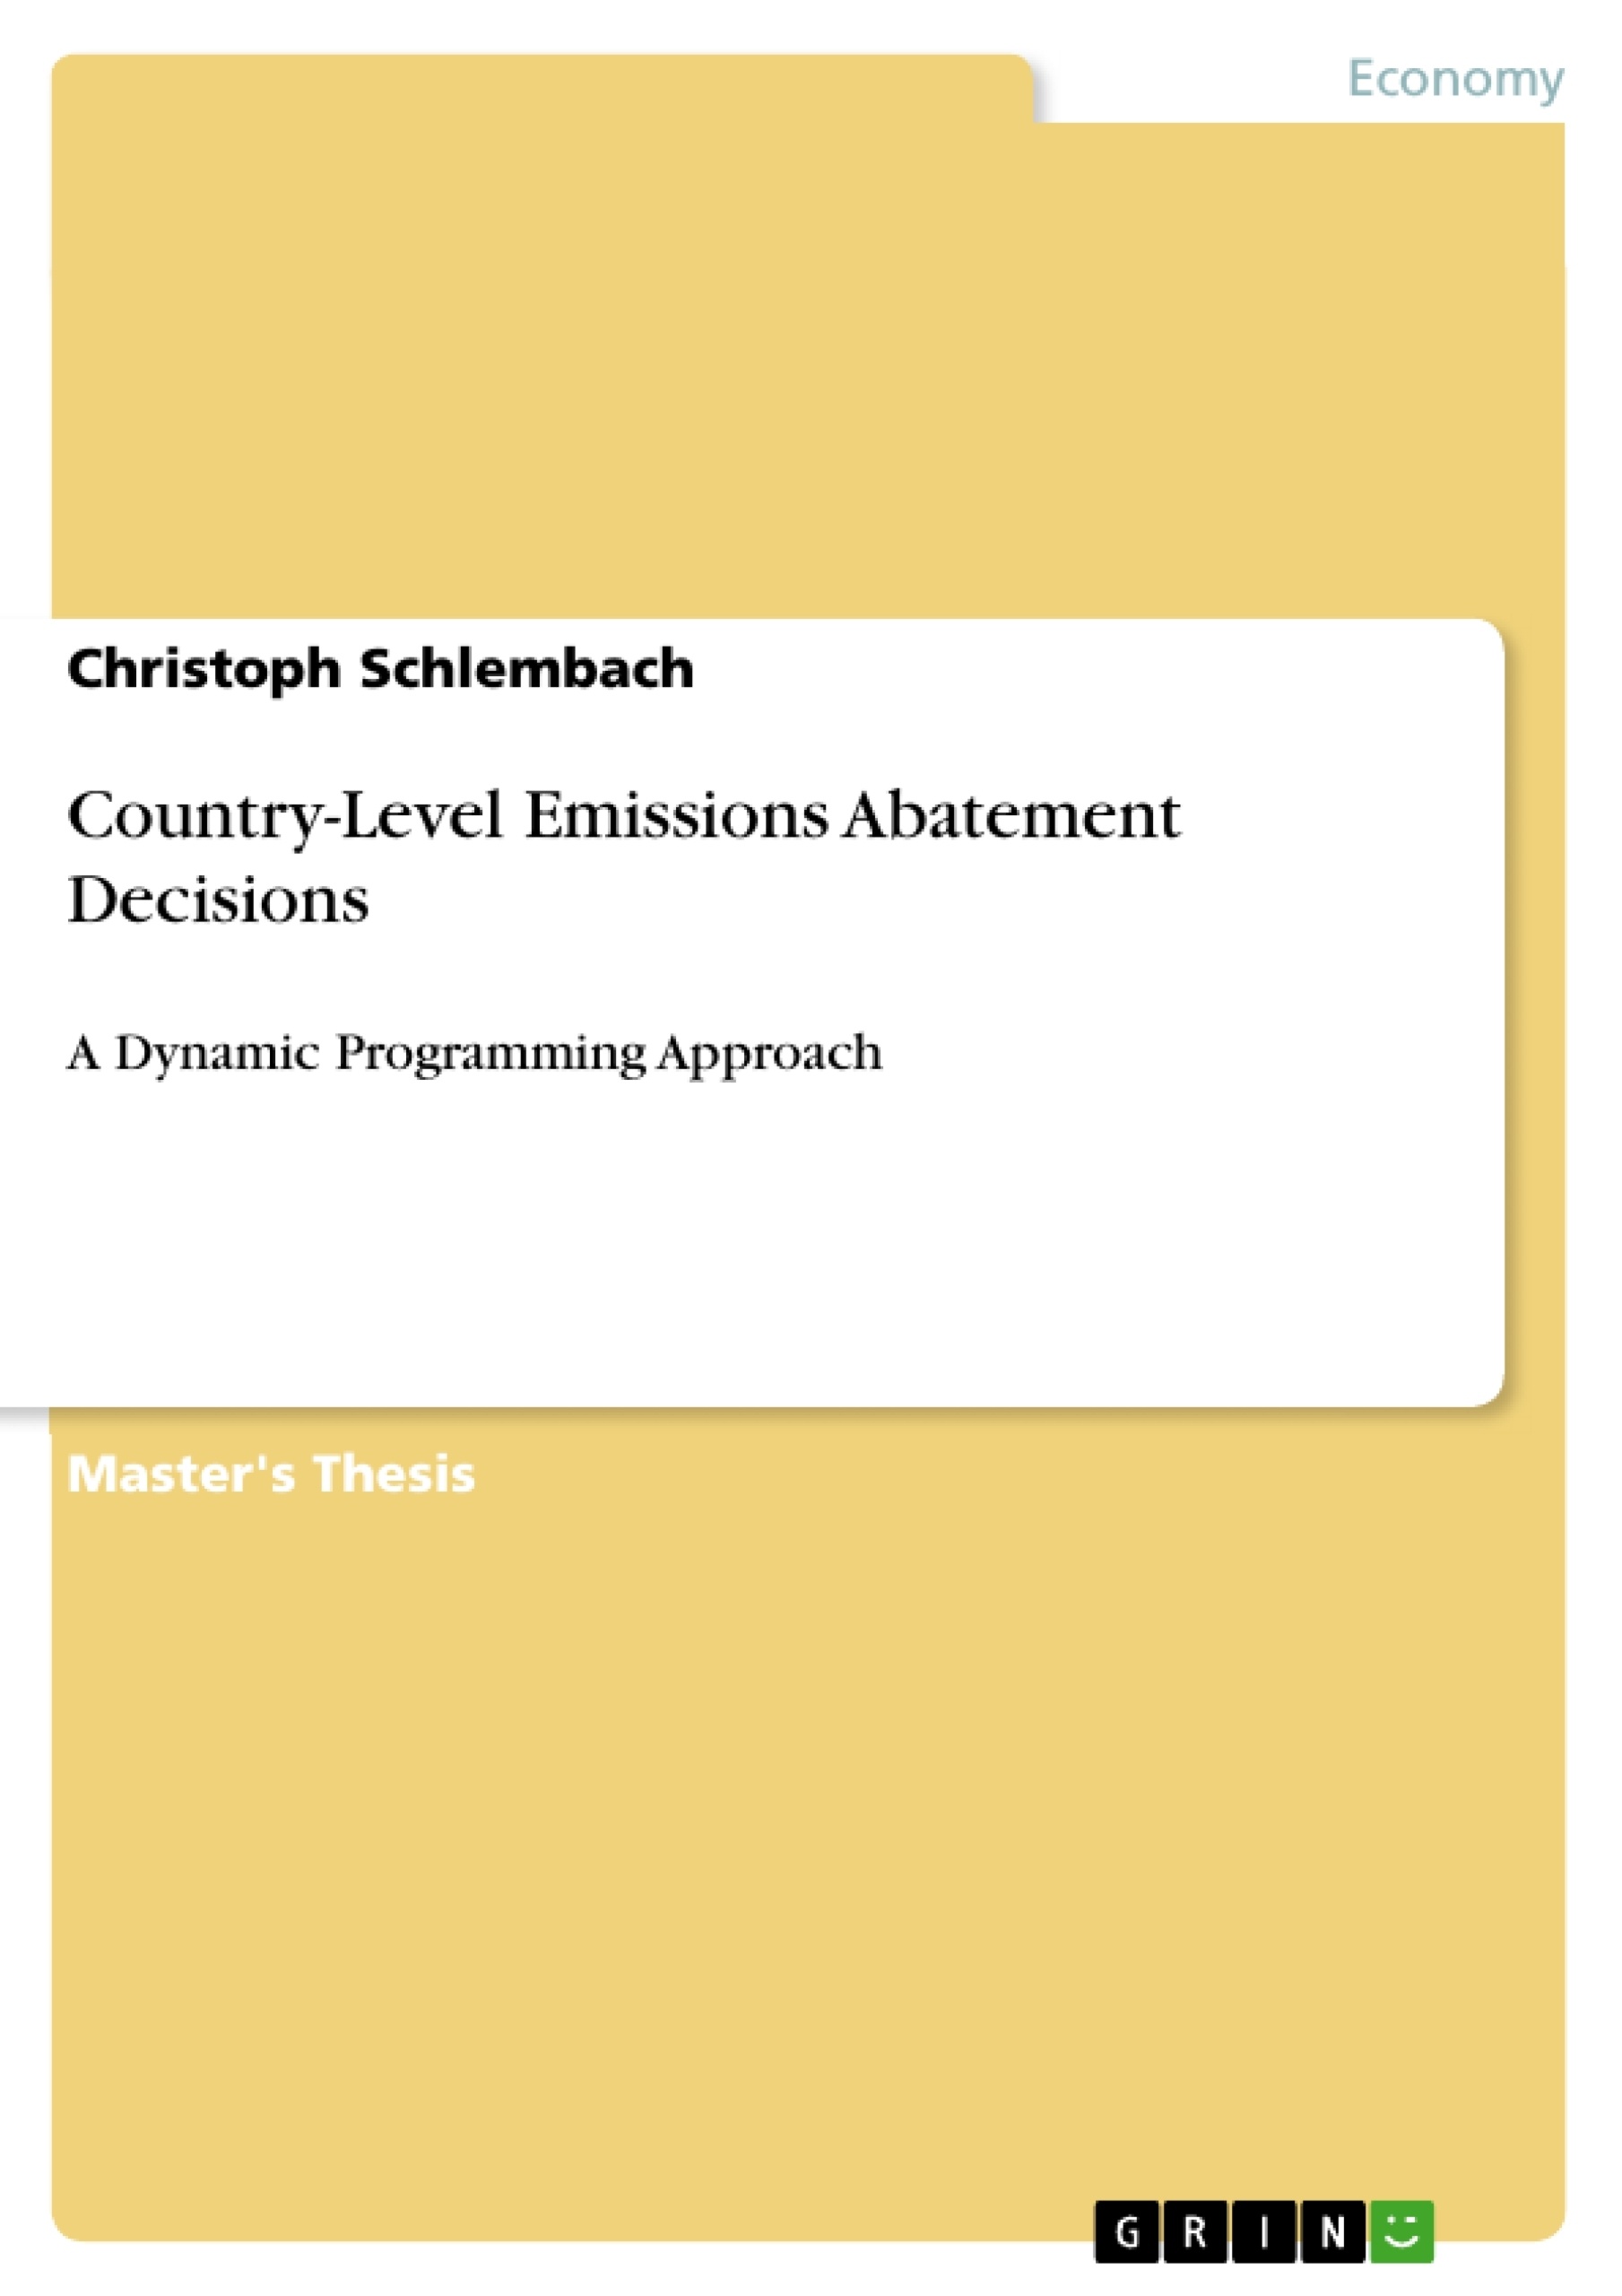 Title: Country-Level Emissions Abatement Decisions